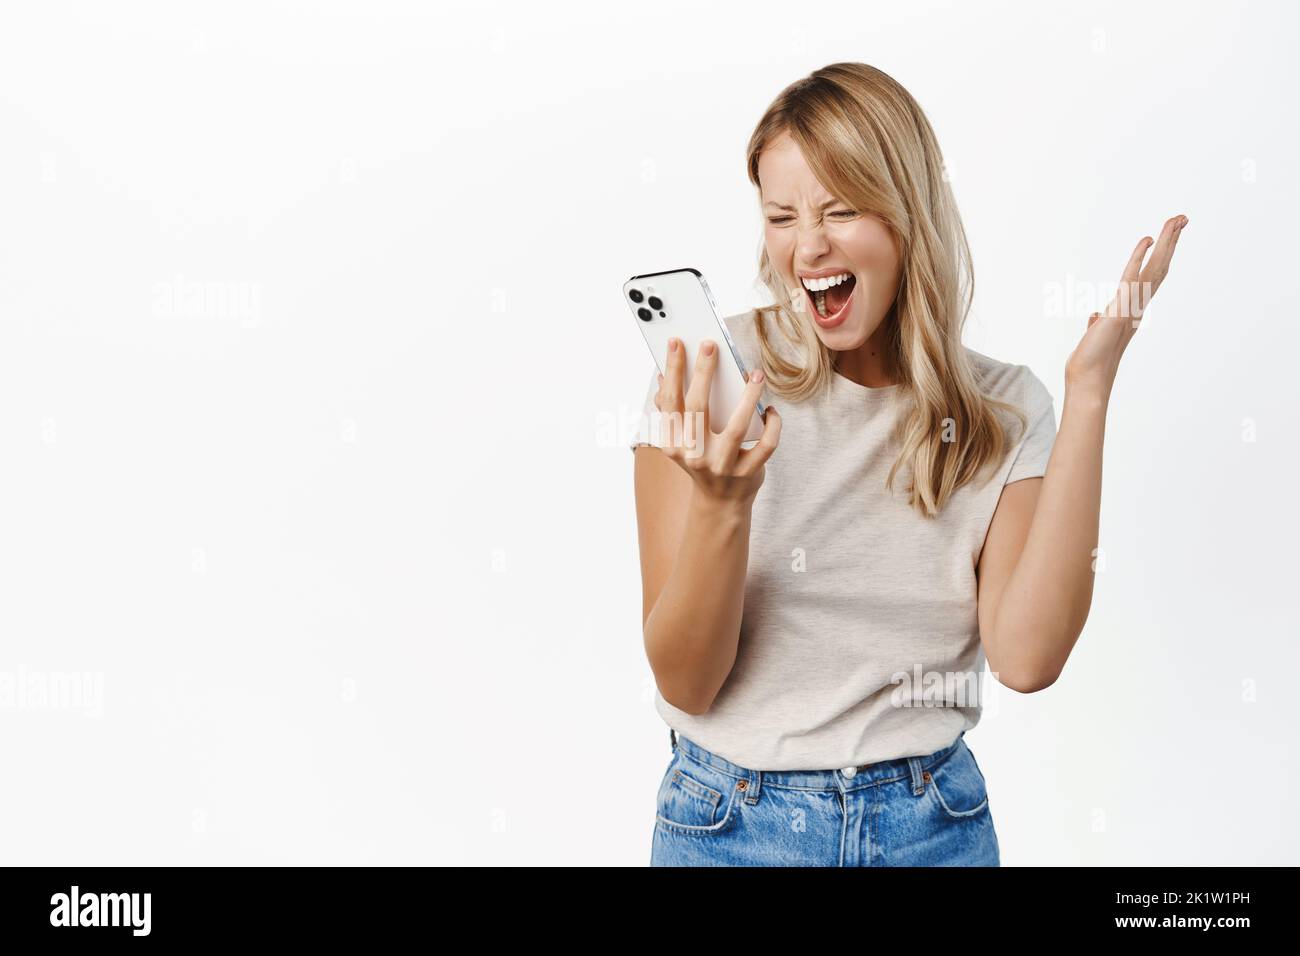 Excited woman looking at mobile phone screen and shouting, screaming at smartphone display, standing over white background. Stock Photo